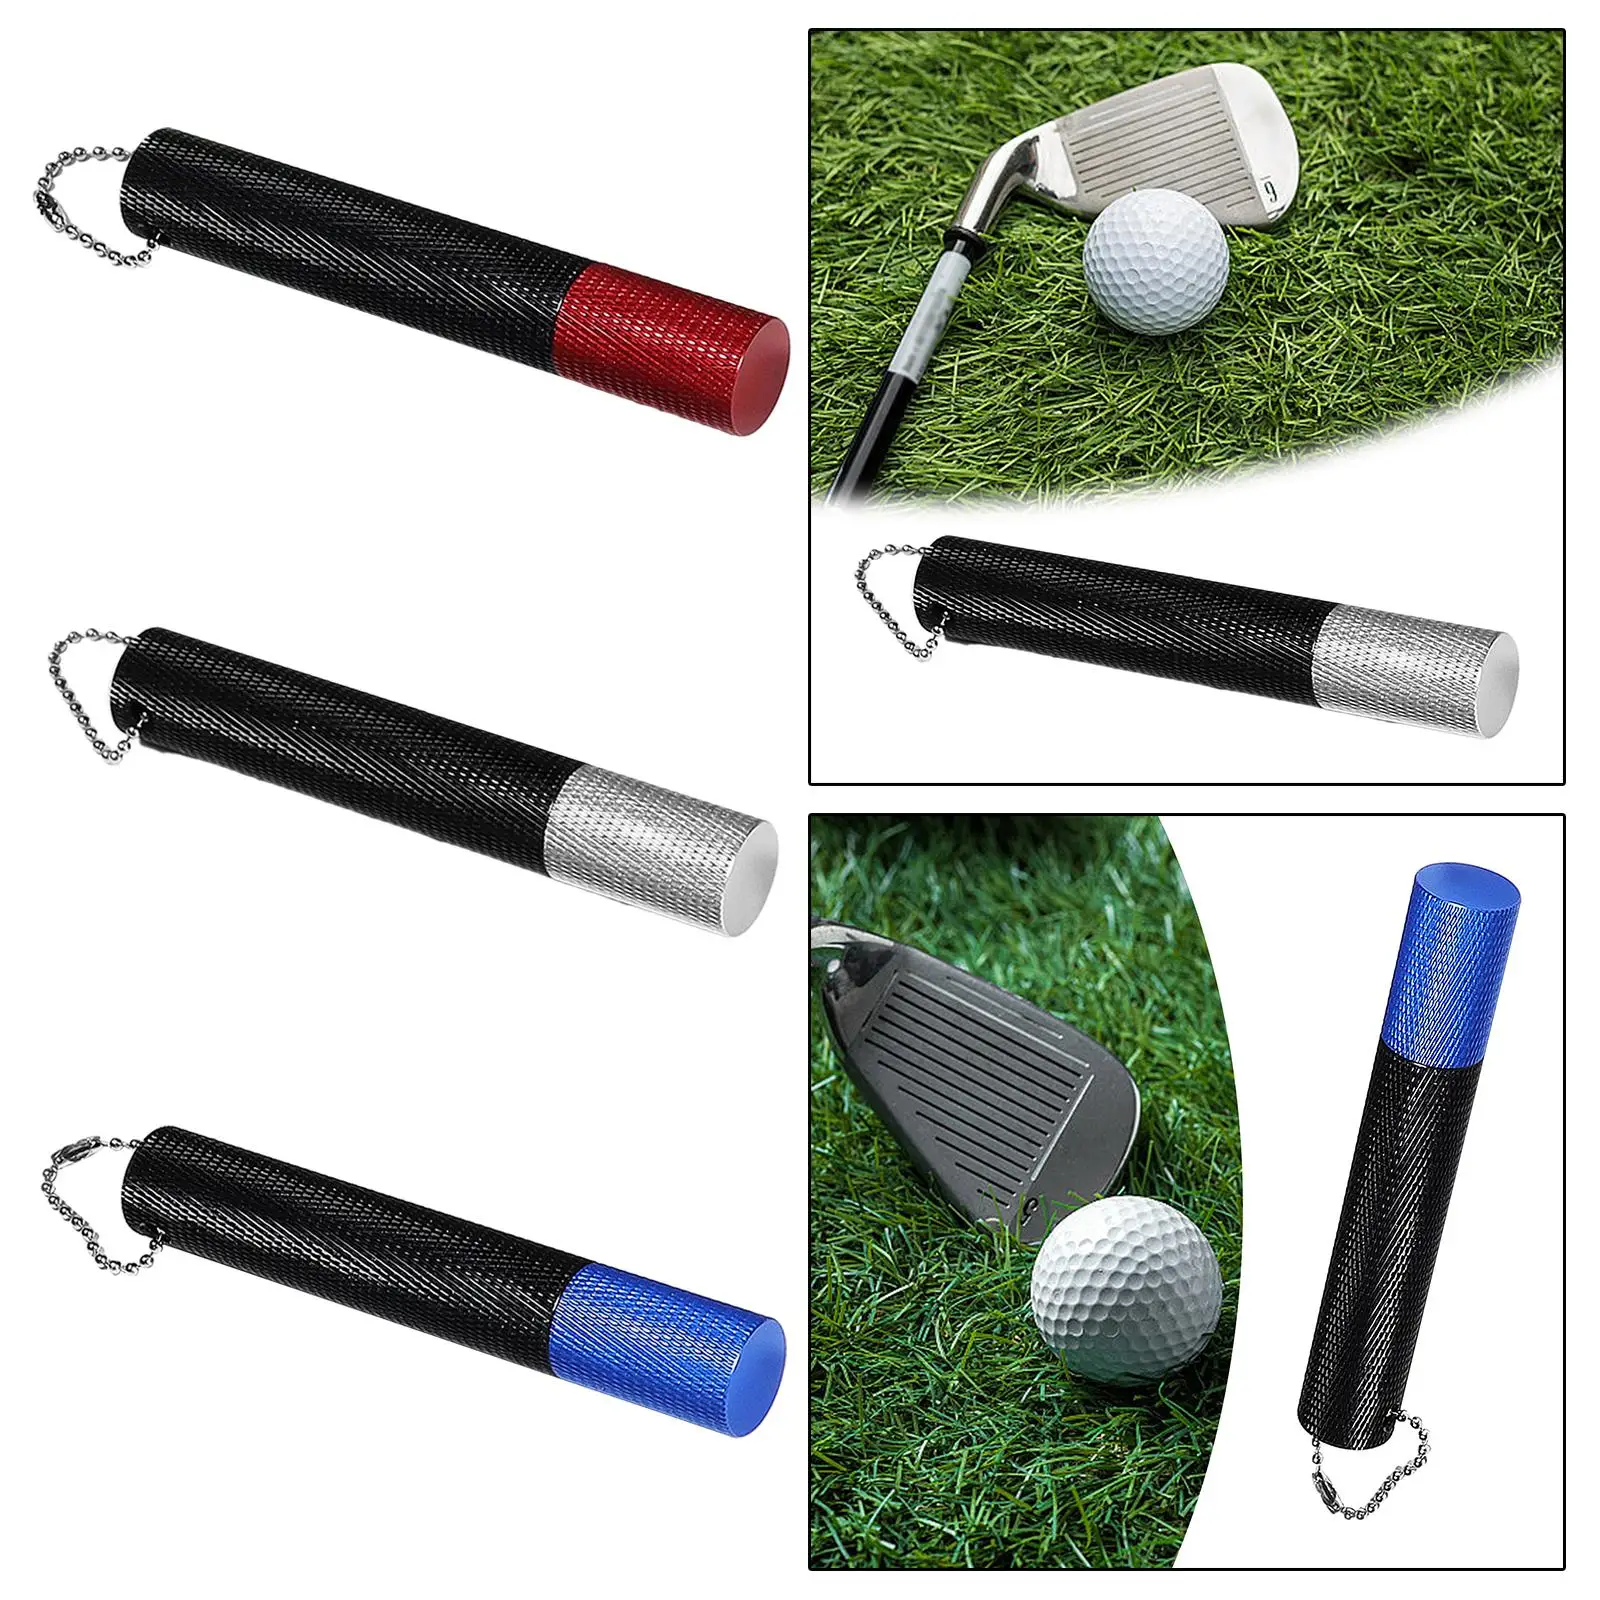 Golf Groove Sharpener Golfer Gift Improved Backspin Ball Control Brush Cleaner Golf Club Regrooving Tool for Golf Training